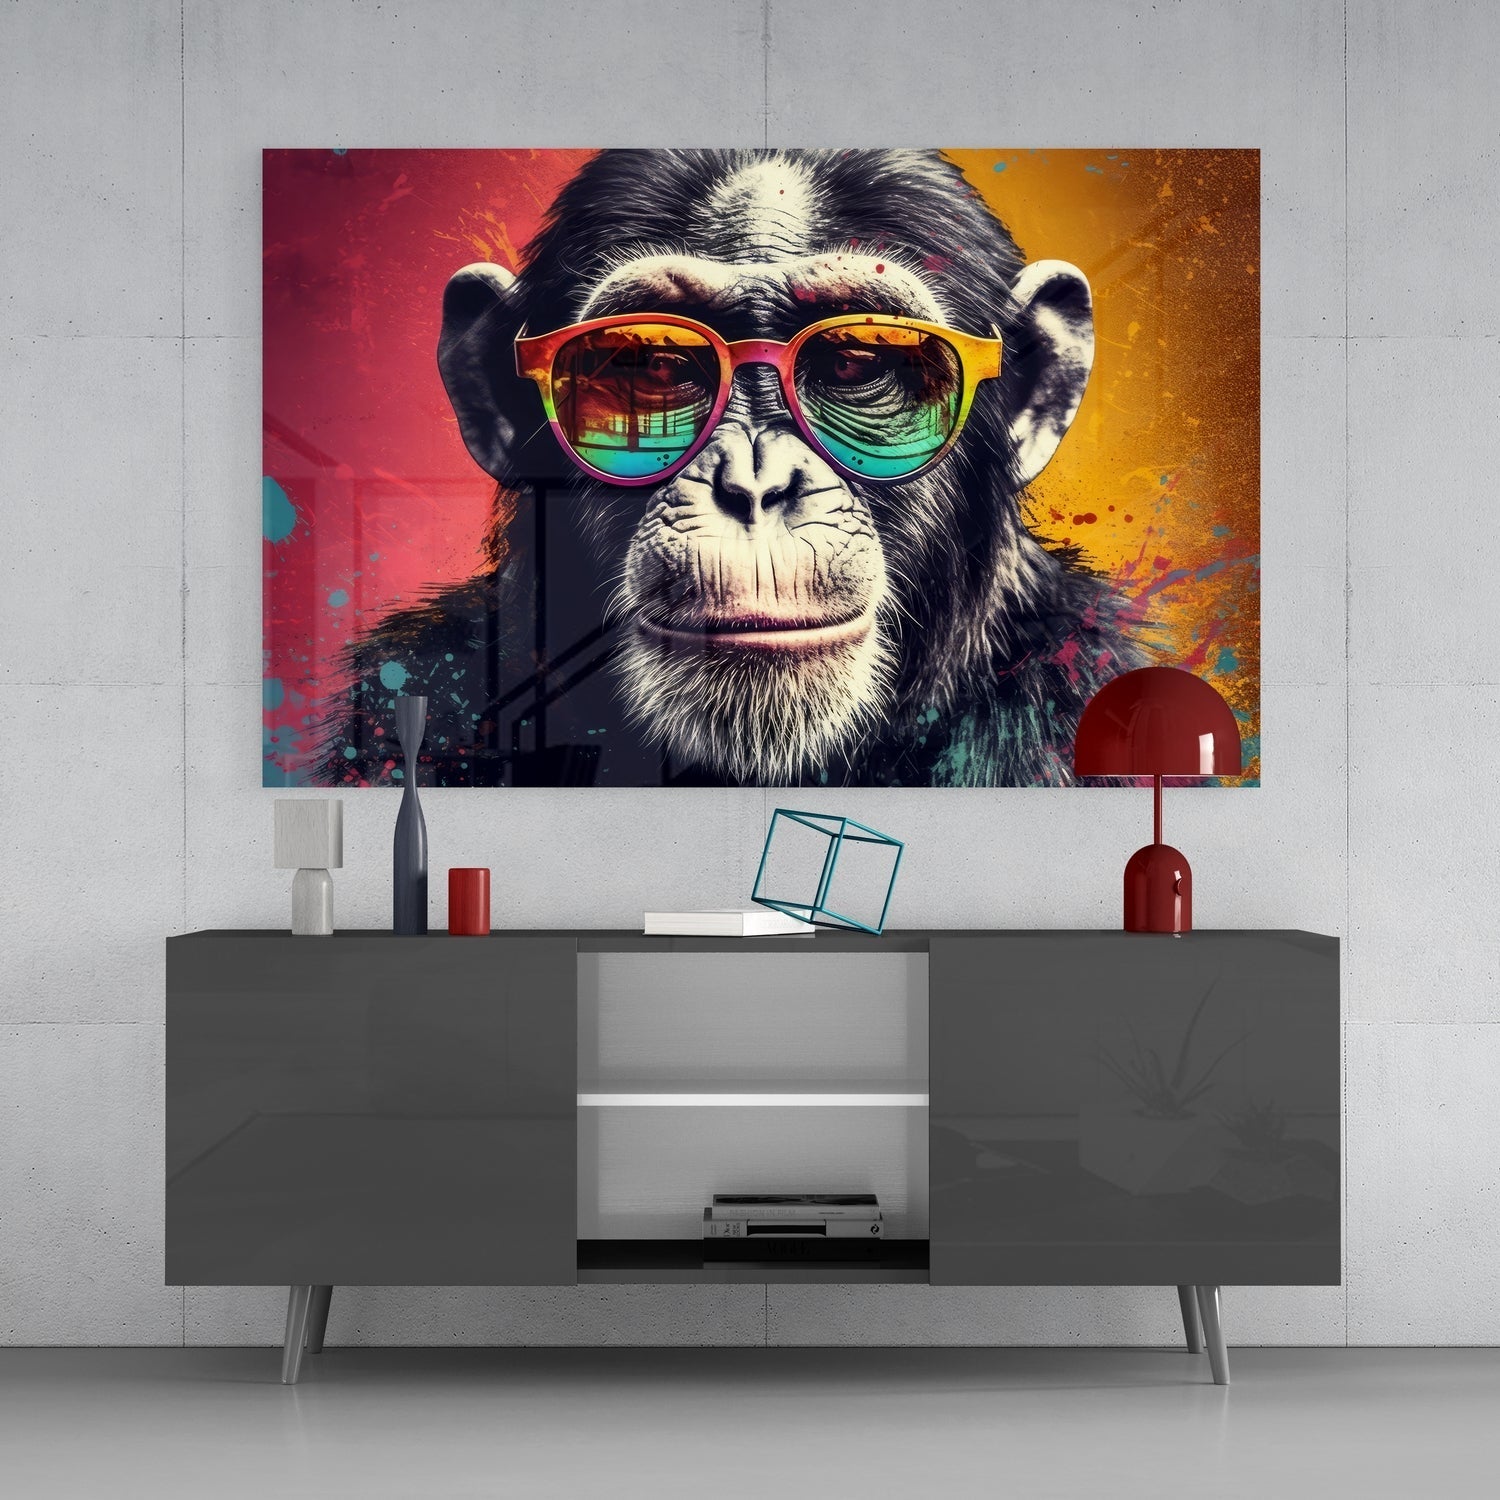 Cool Monkey Glass Wall Art || Designer Collection